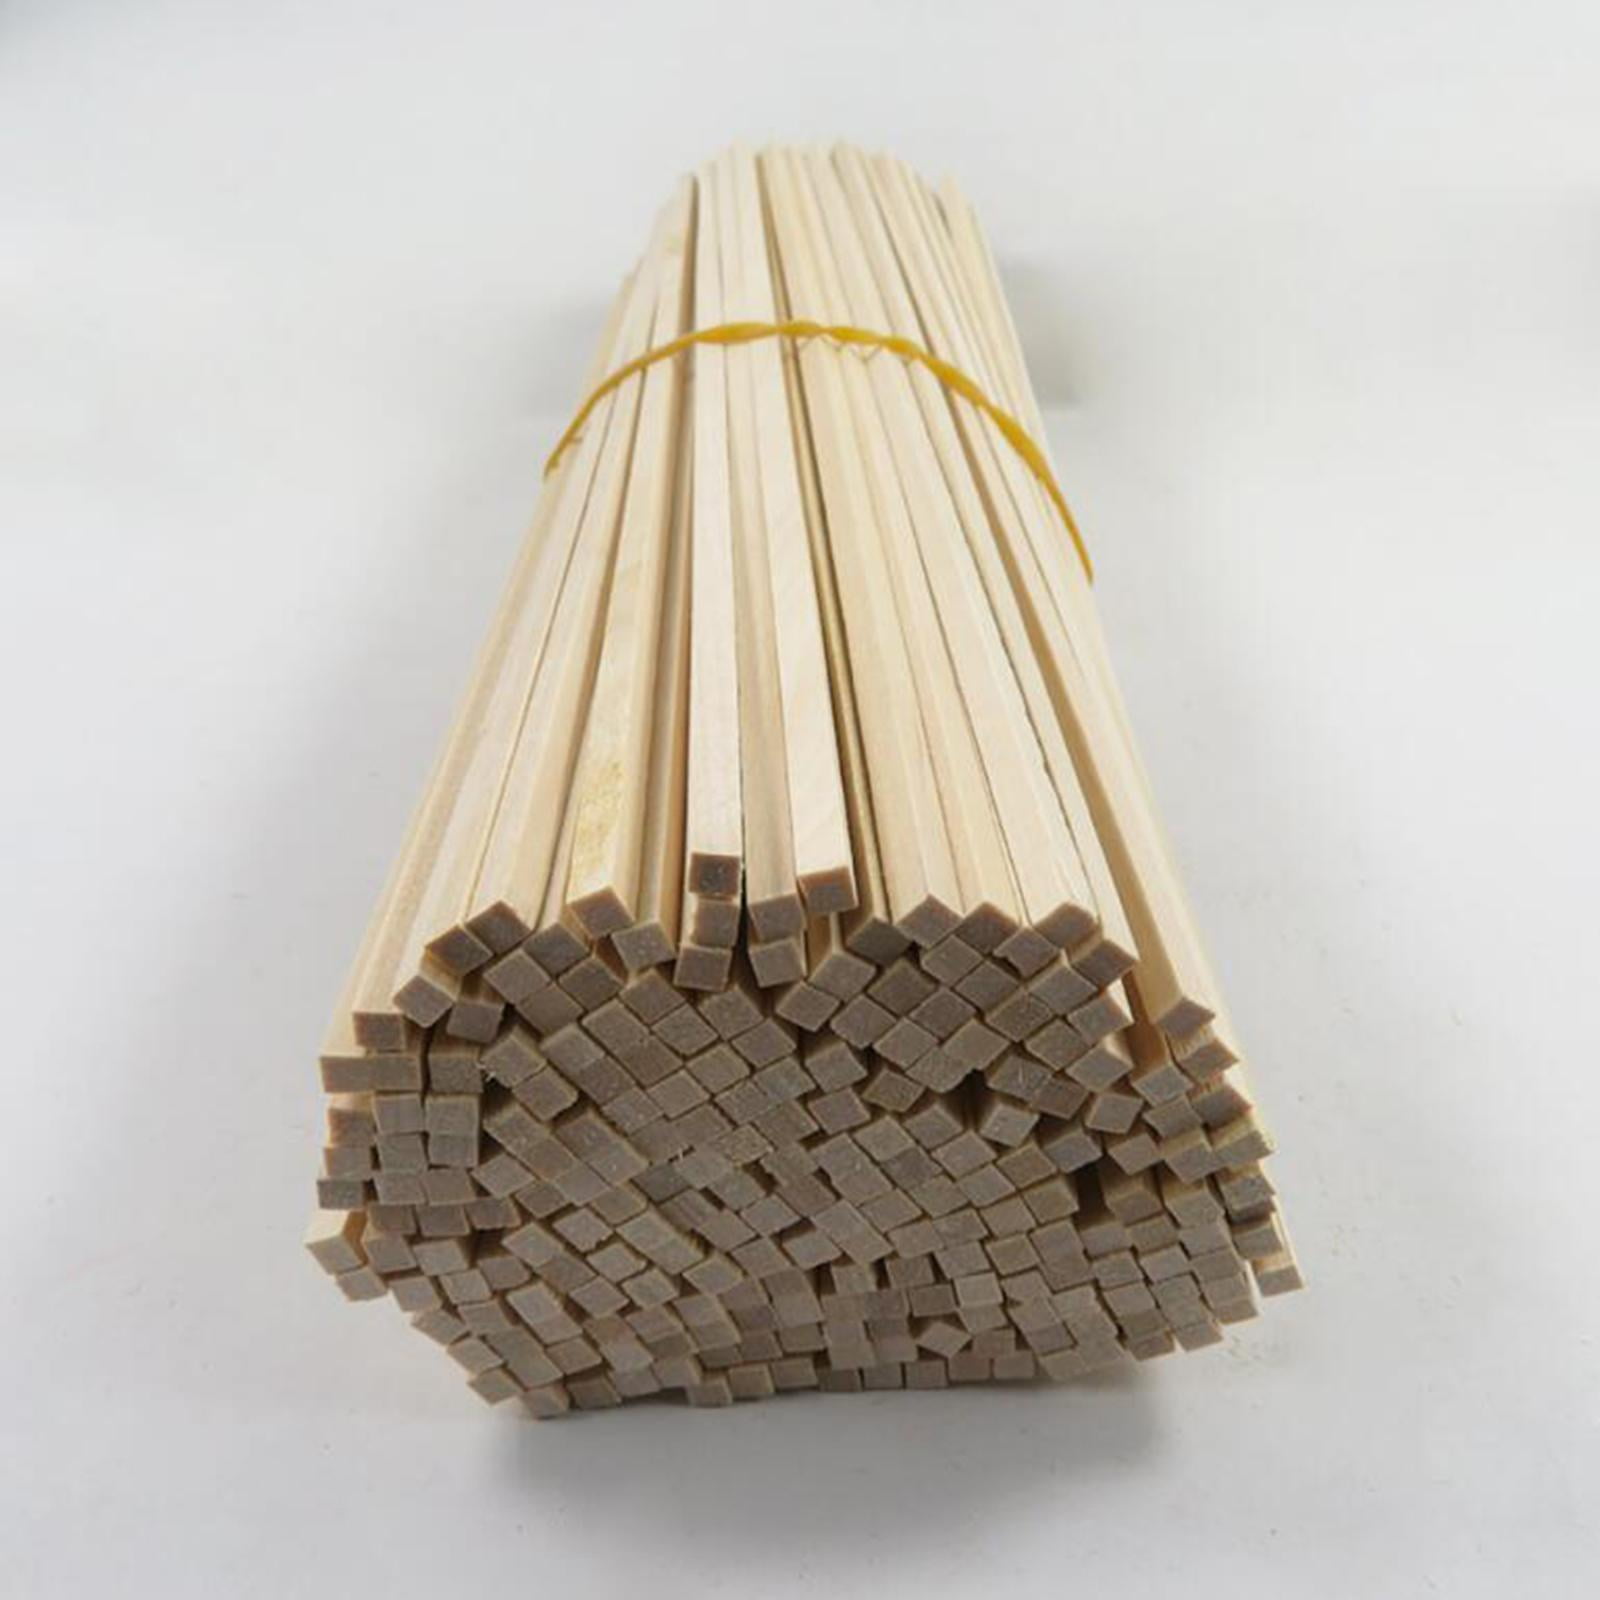 50 Pieces Unfinished Wood Sticks Woodworking Smooth Long Dowel Strips Dowel  Sticks for Crafts Home Decor Supplies - AliExpress